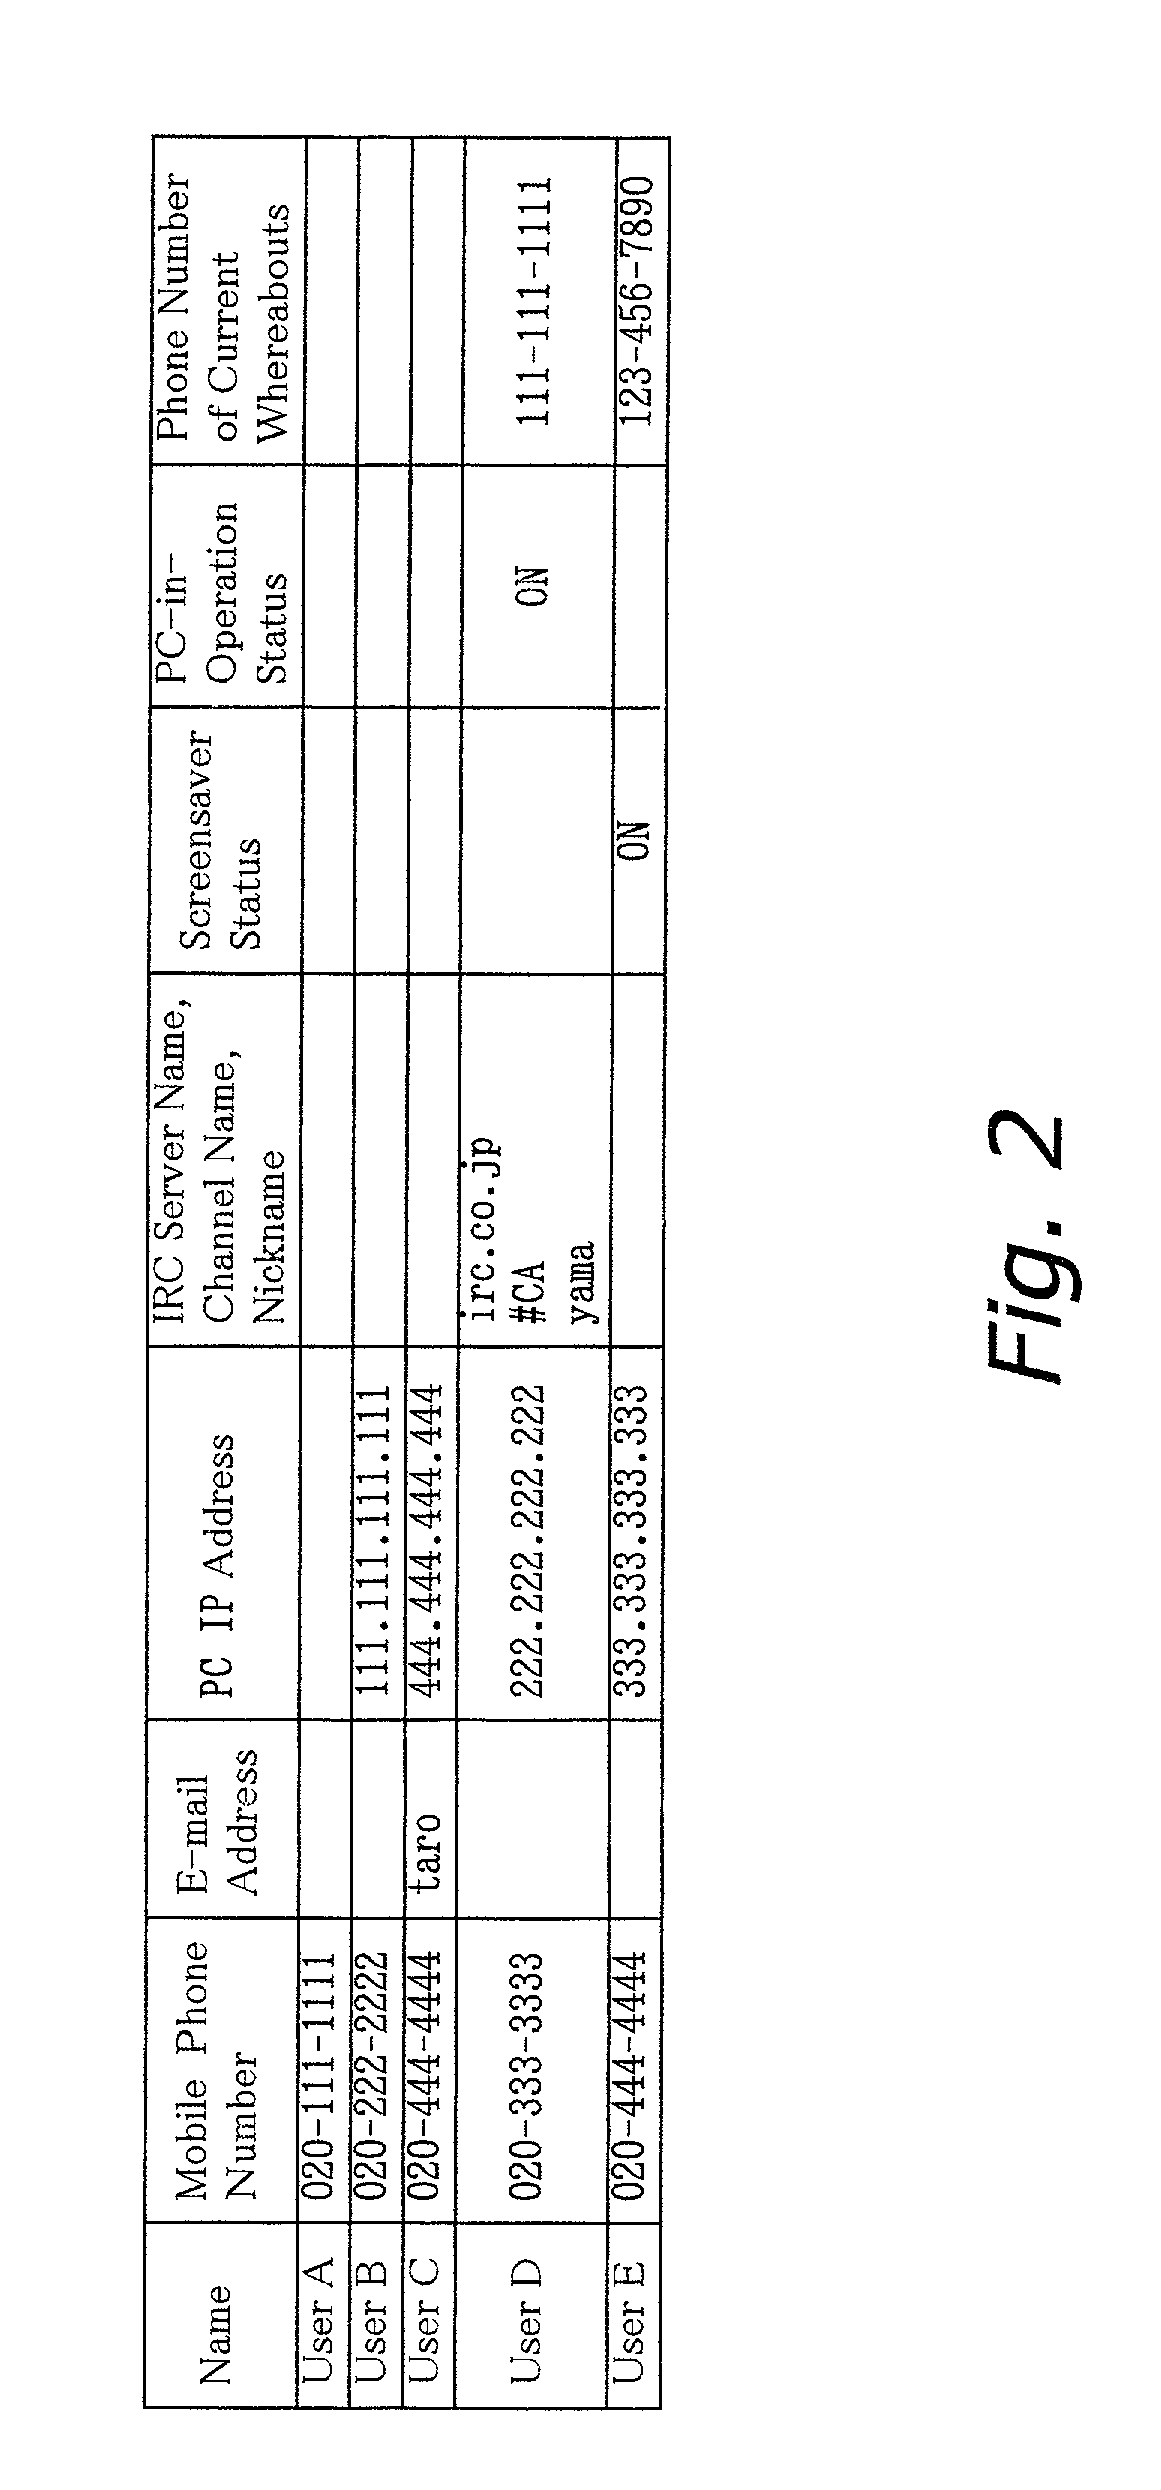 Text messaging system and method